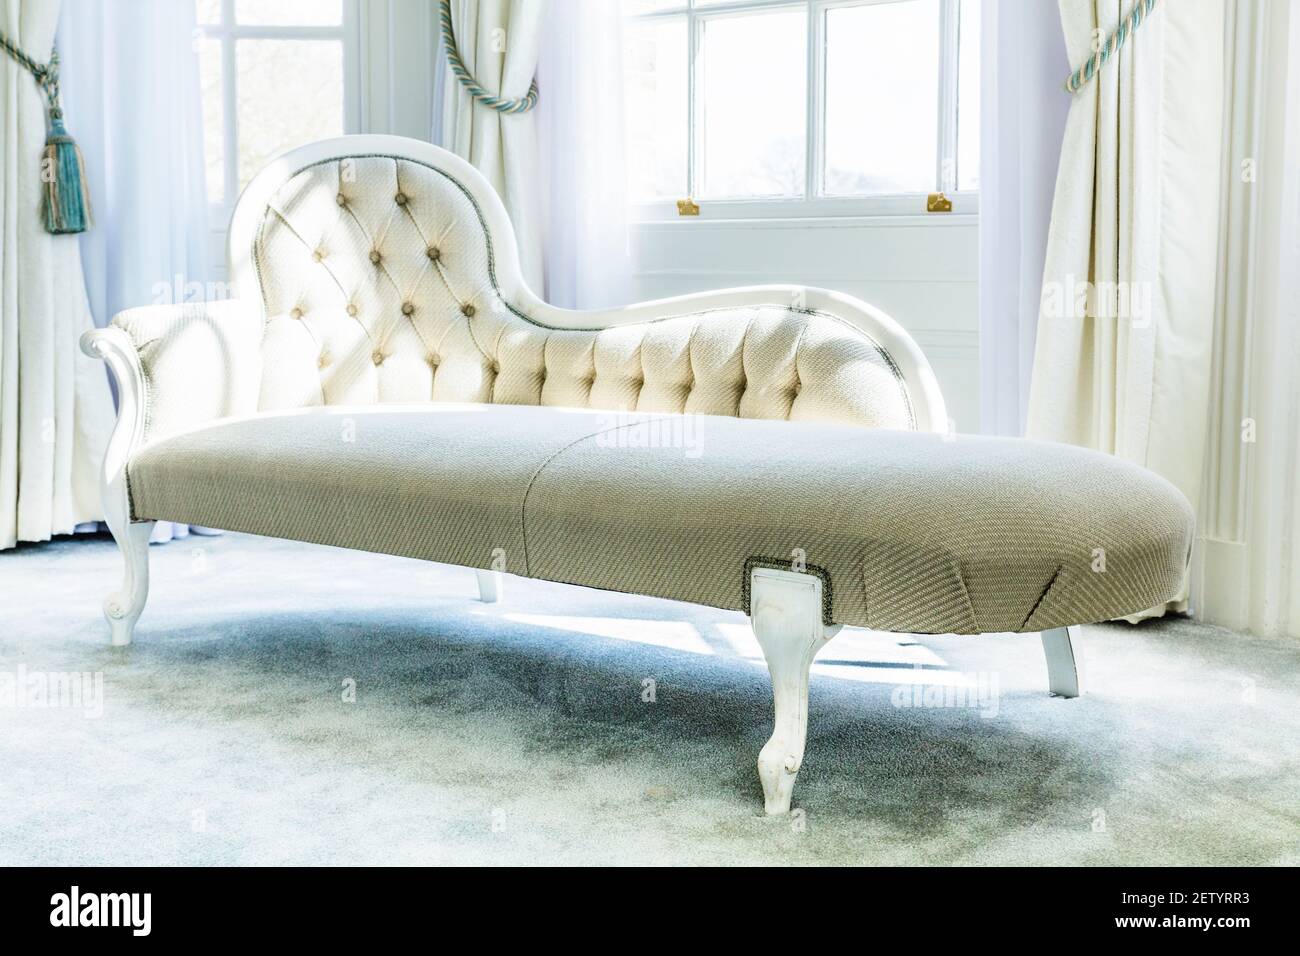 Classic Chaise Lounge in a luxurious setting Stock Photo